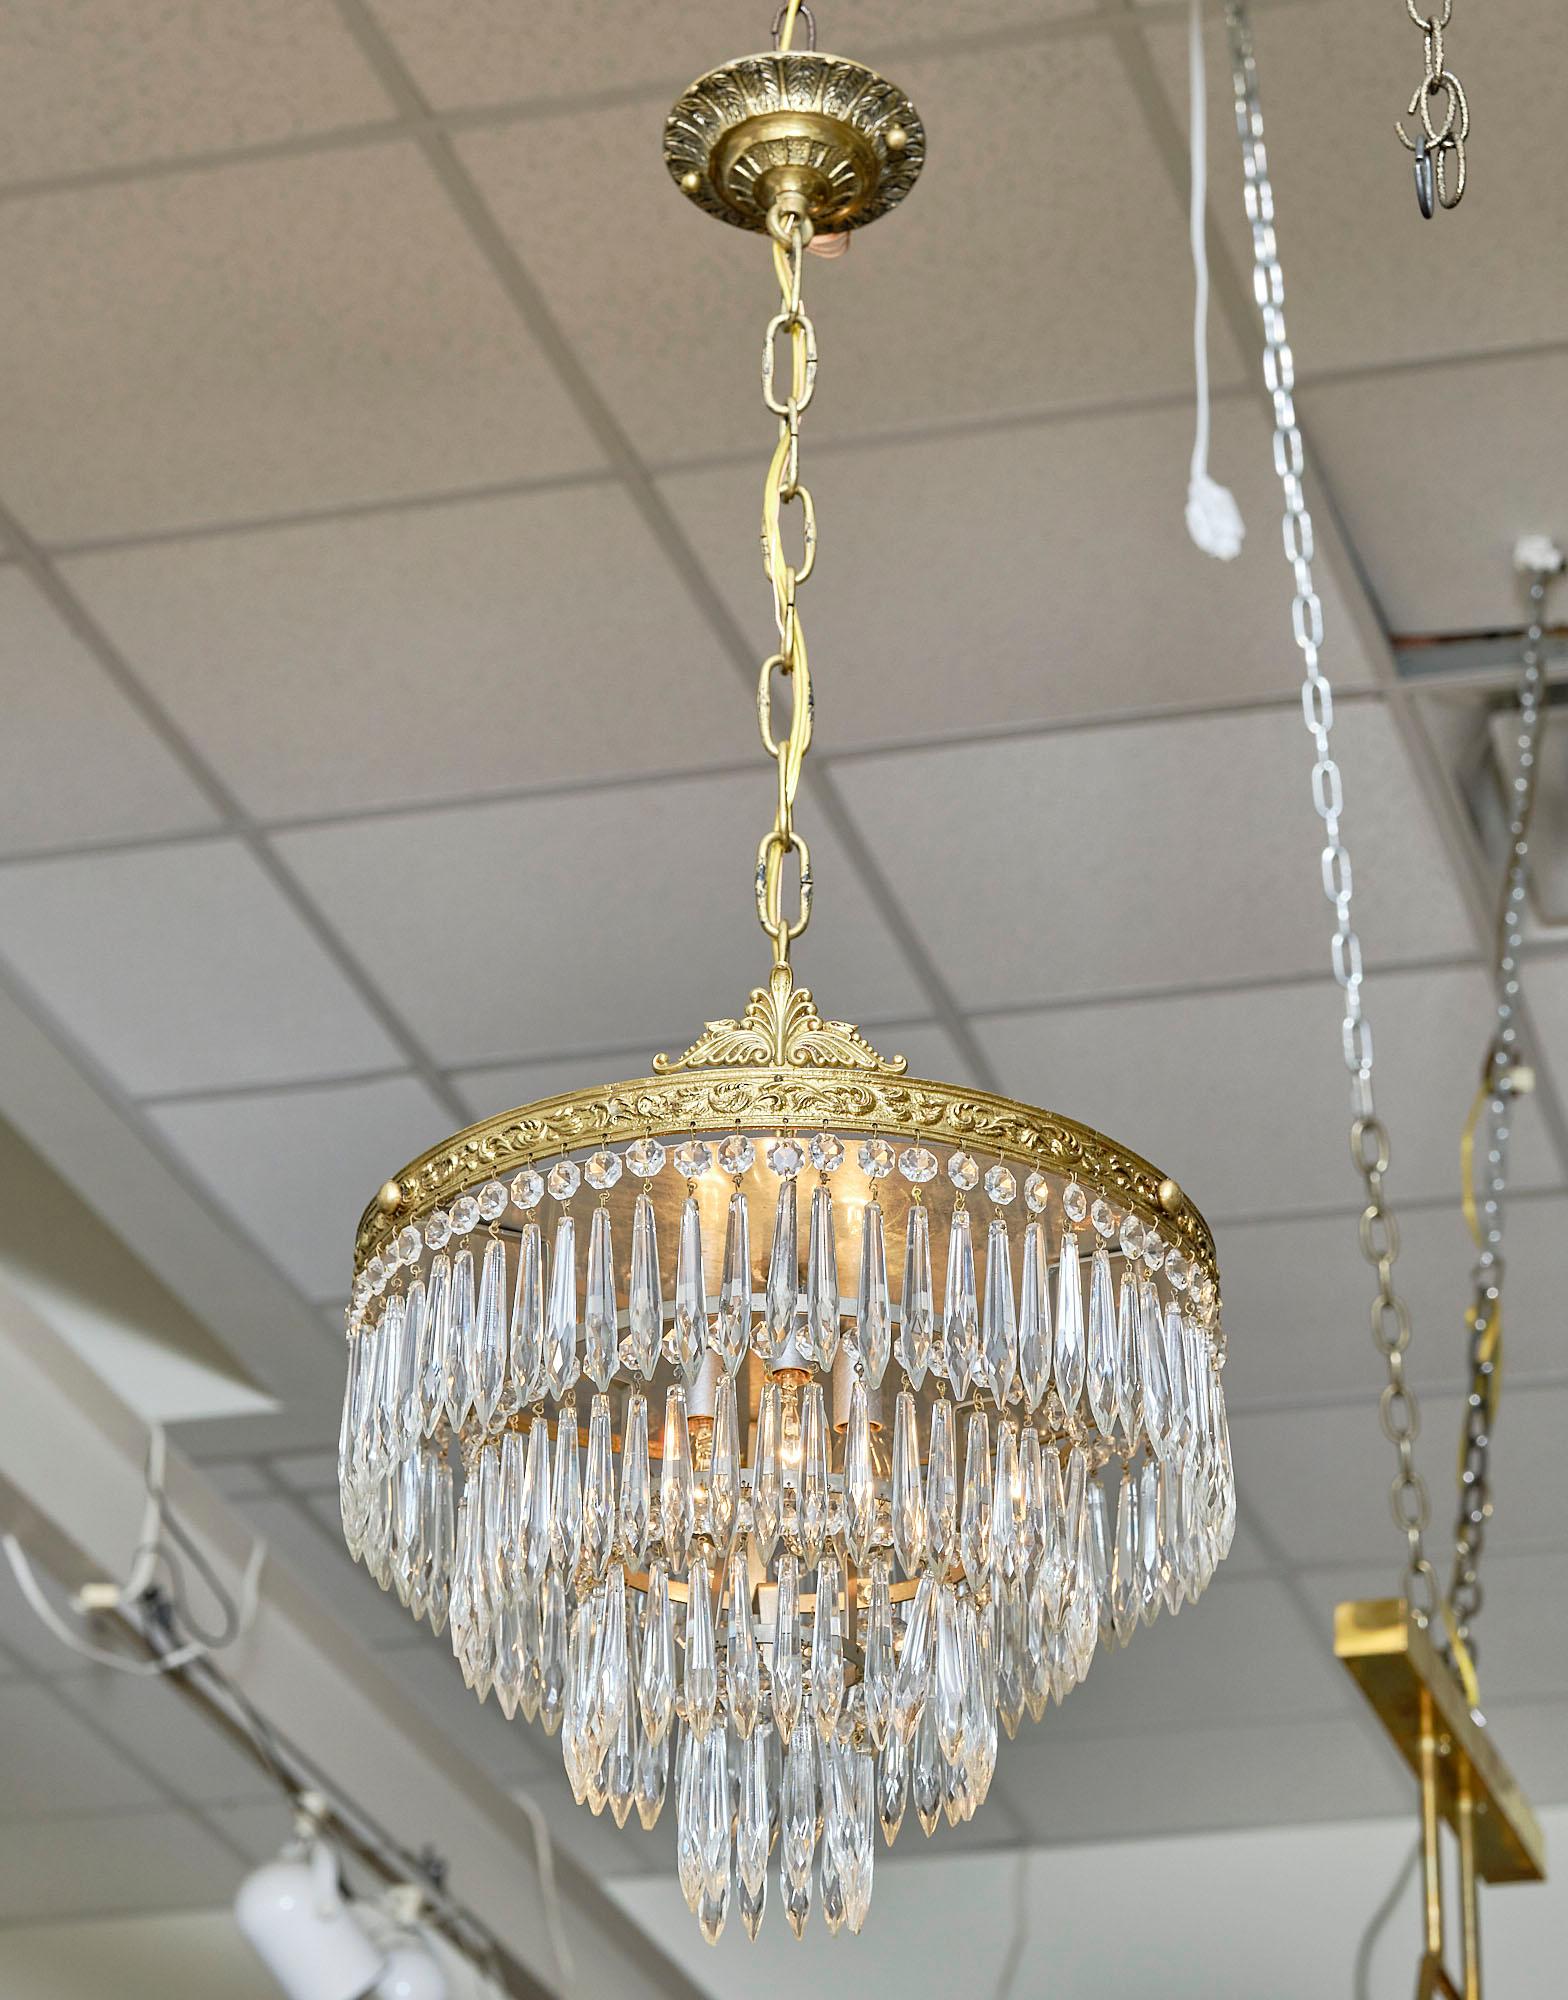 Chandelier from France made of four tiers of cut crystal pendants hanging from an embossed brass structure in the Louis XVI style. This piece has been newly wired to fit US standards.